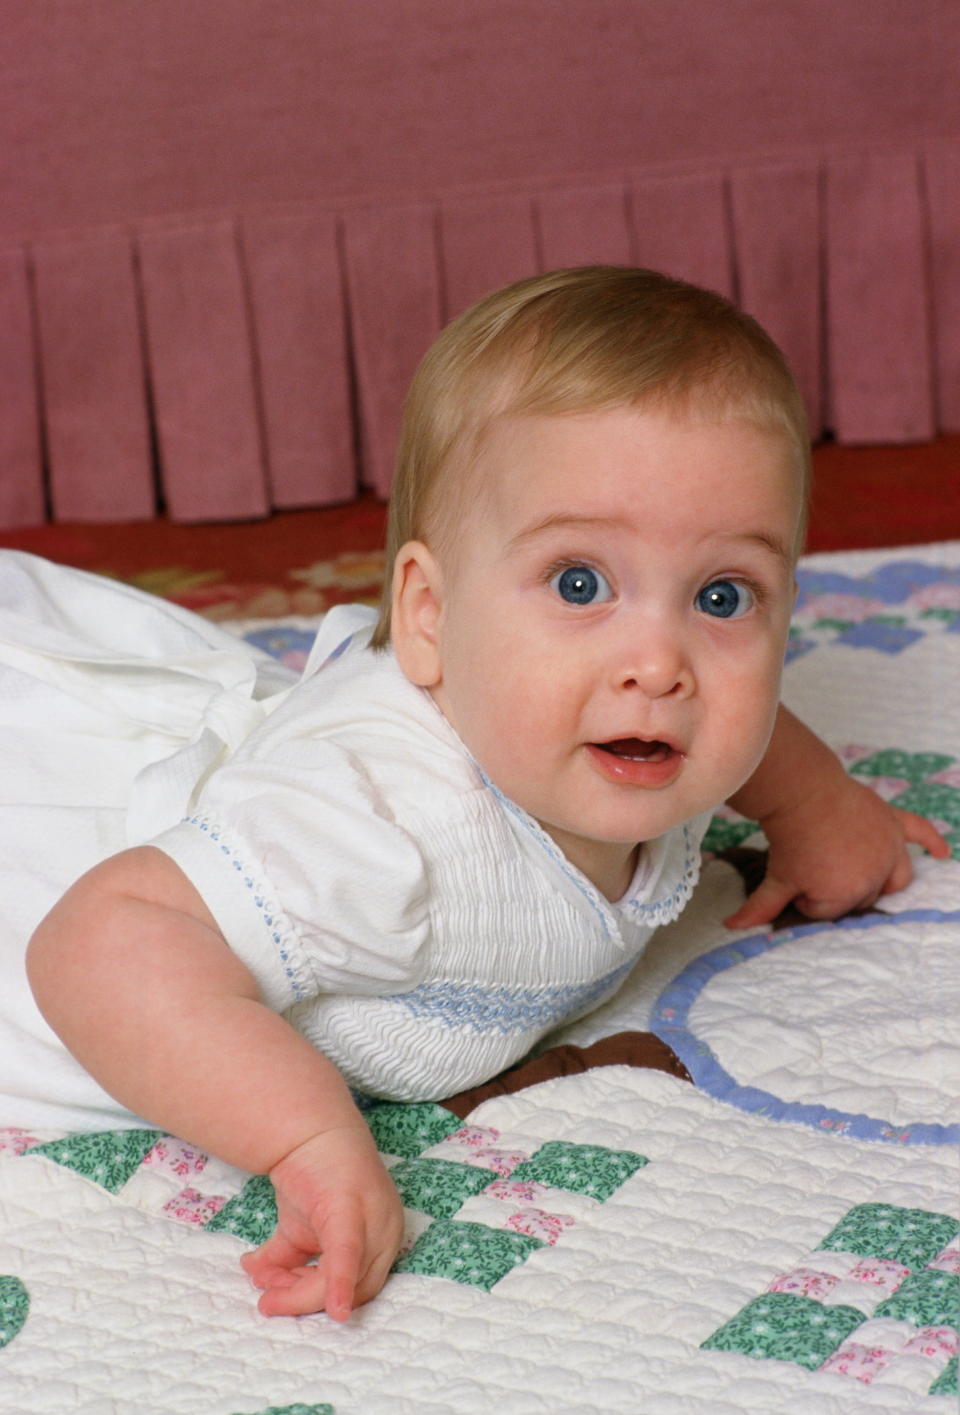 There’s no denying all the kids look like their famous dad, Prince William, when he was a baby. [Photo: Getty Images]